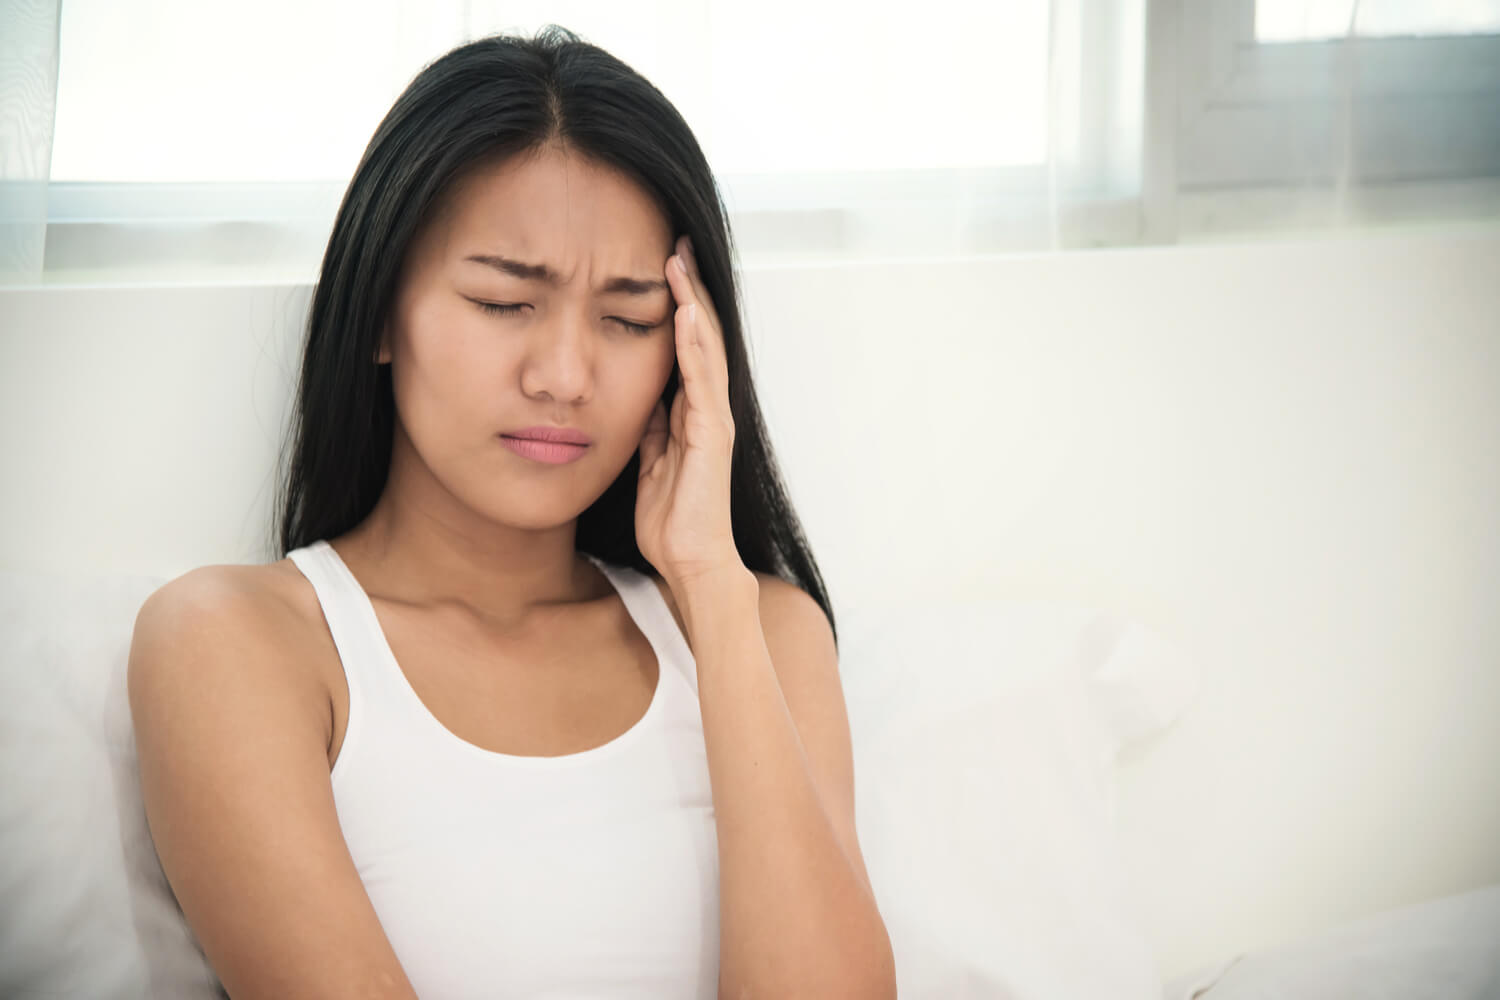 headache in women - signs you are pregnant or not